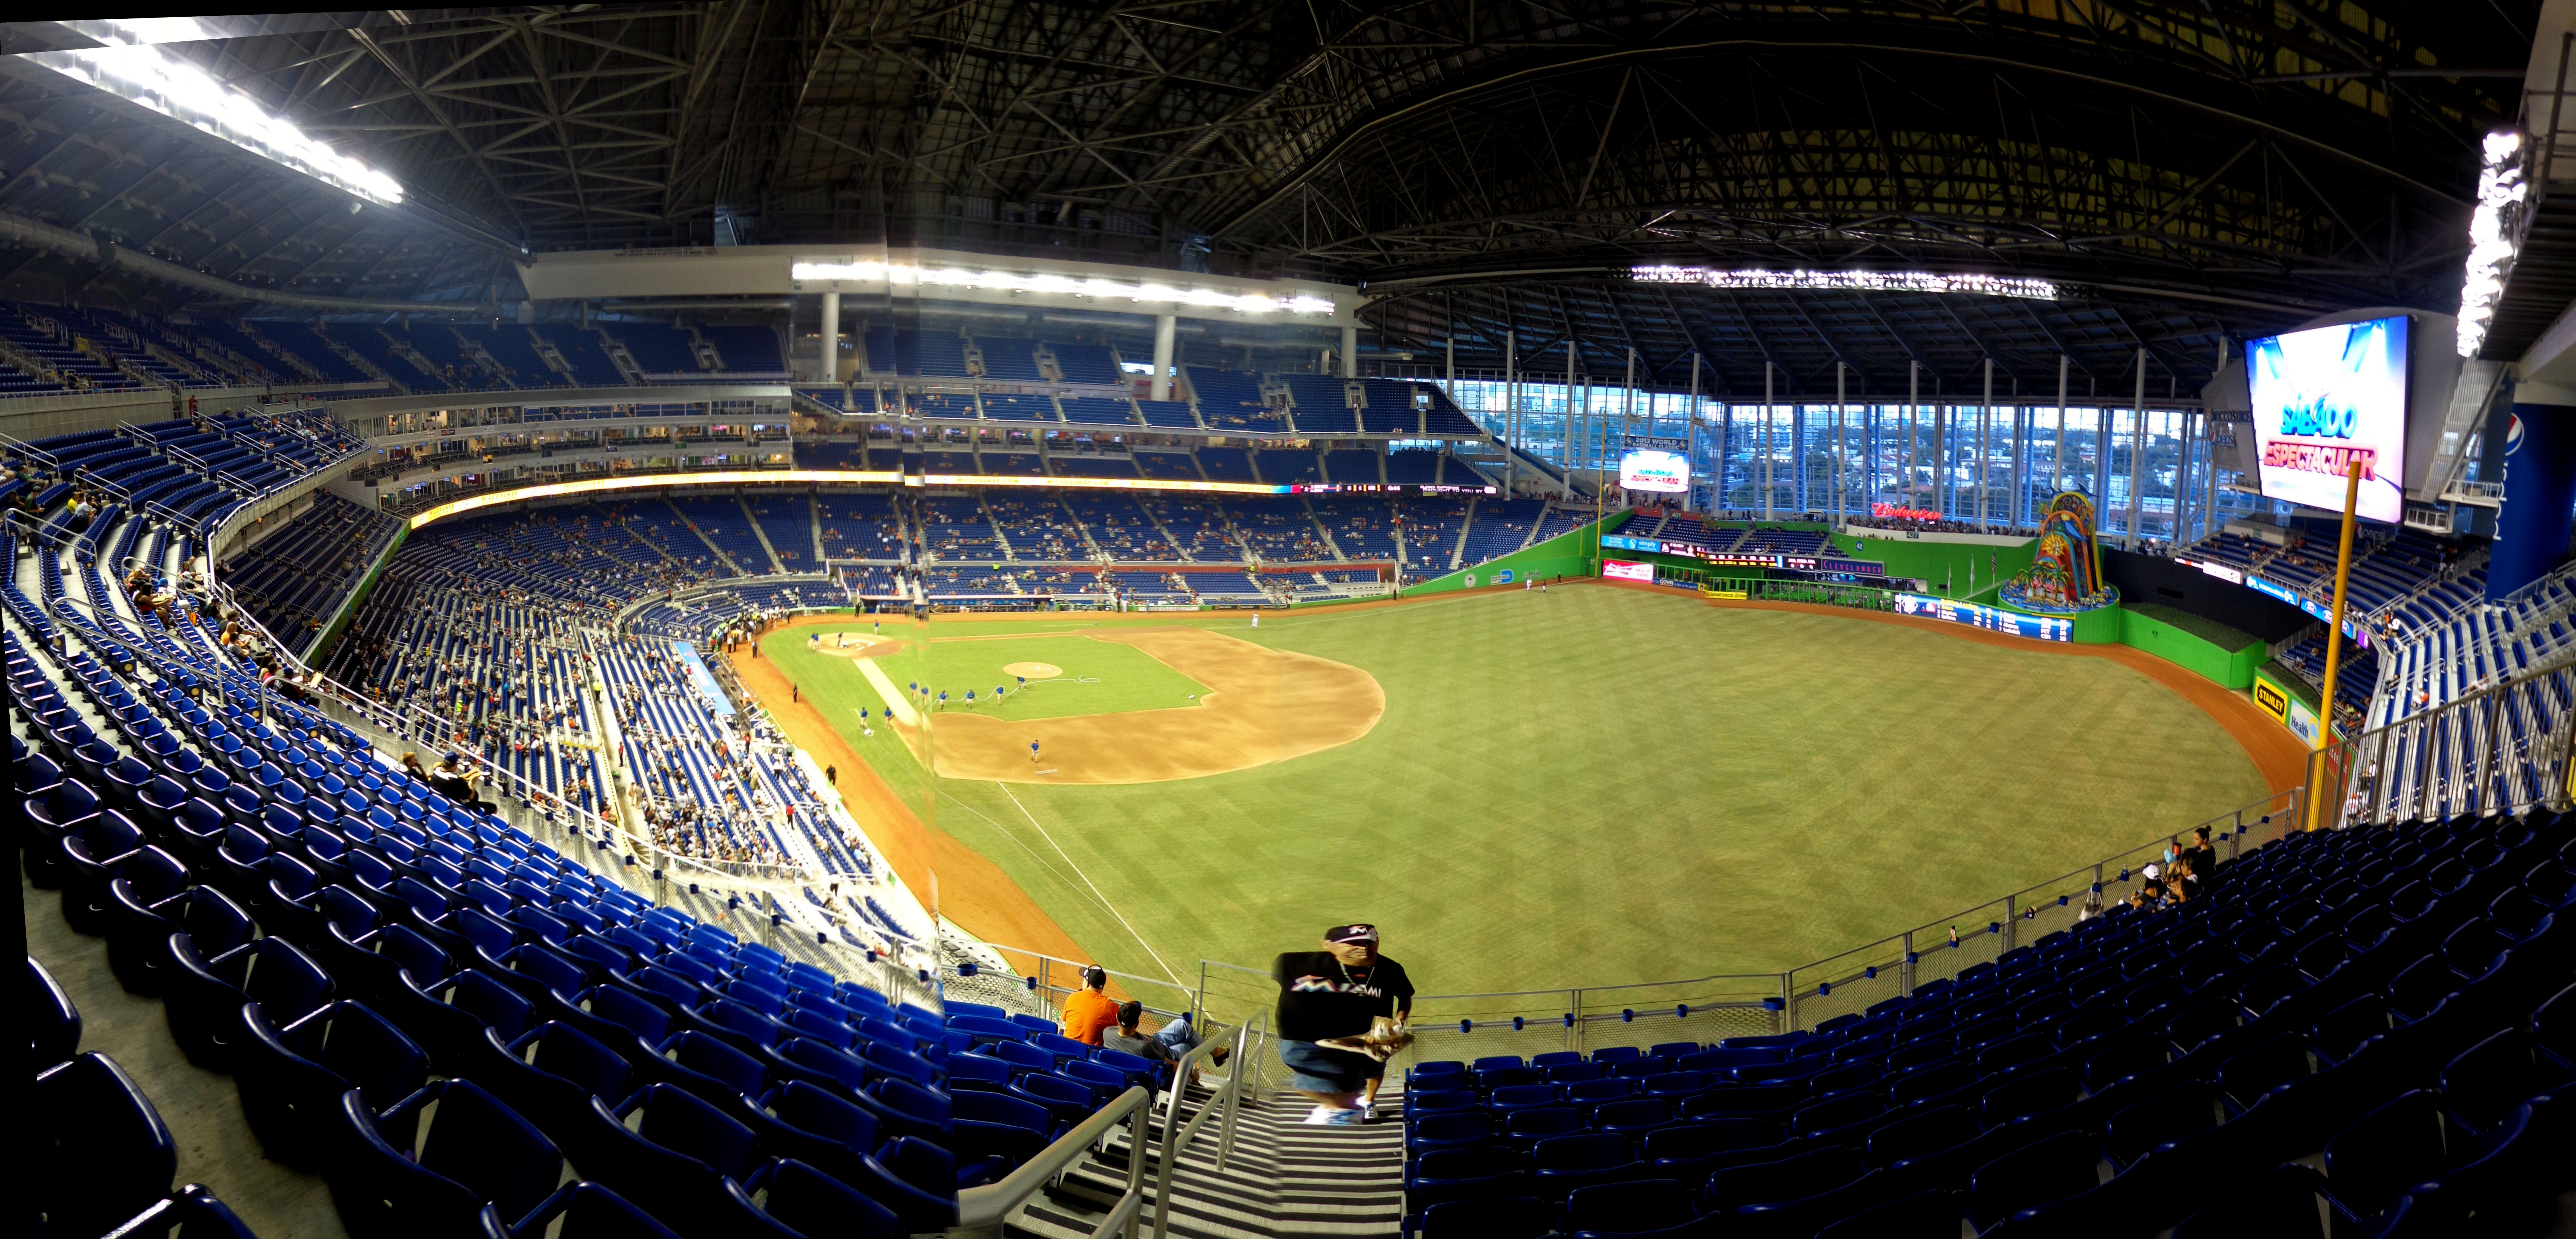 The 300s Reviews: Marlins Park